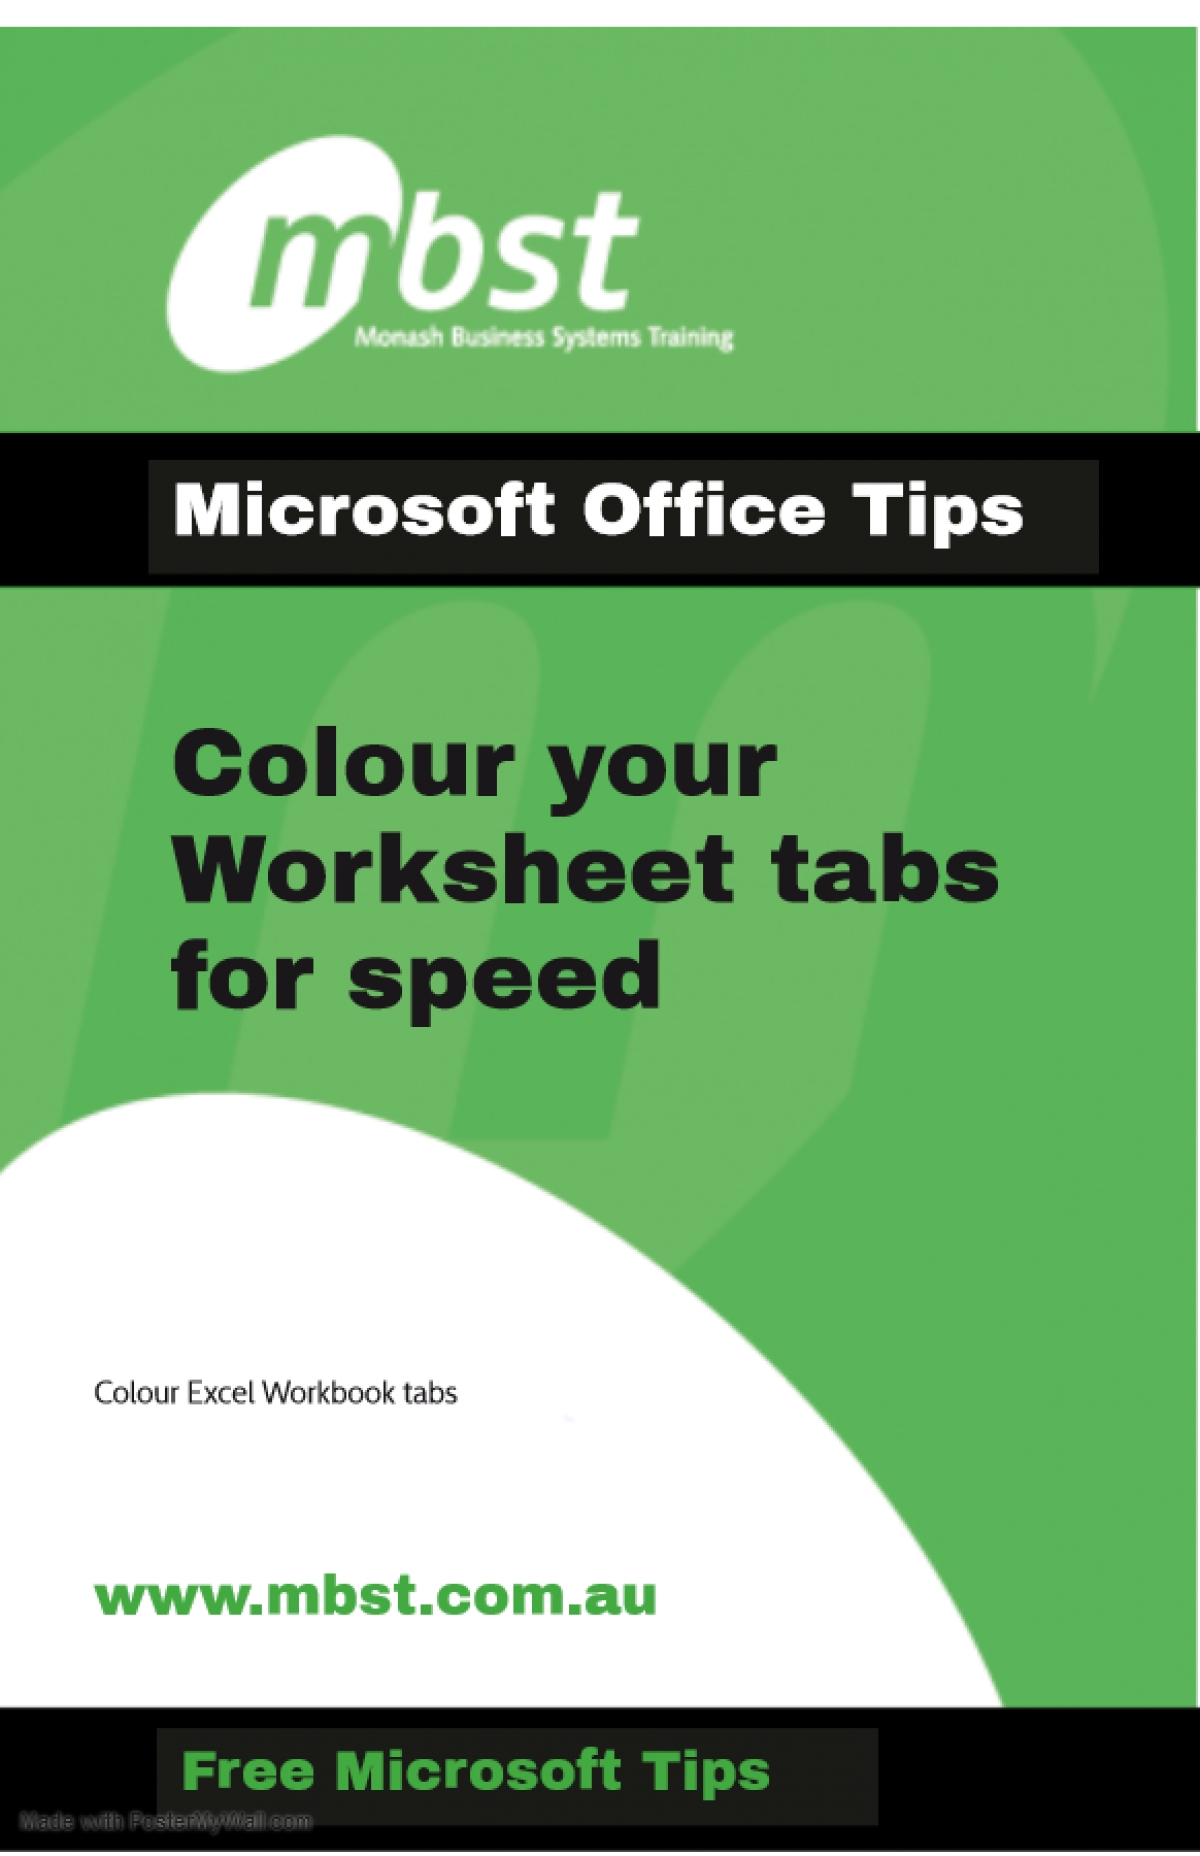 Colour your Worksheet tabs